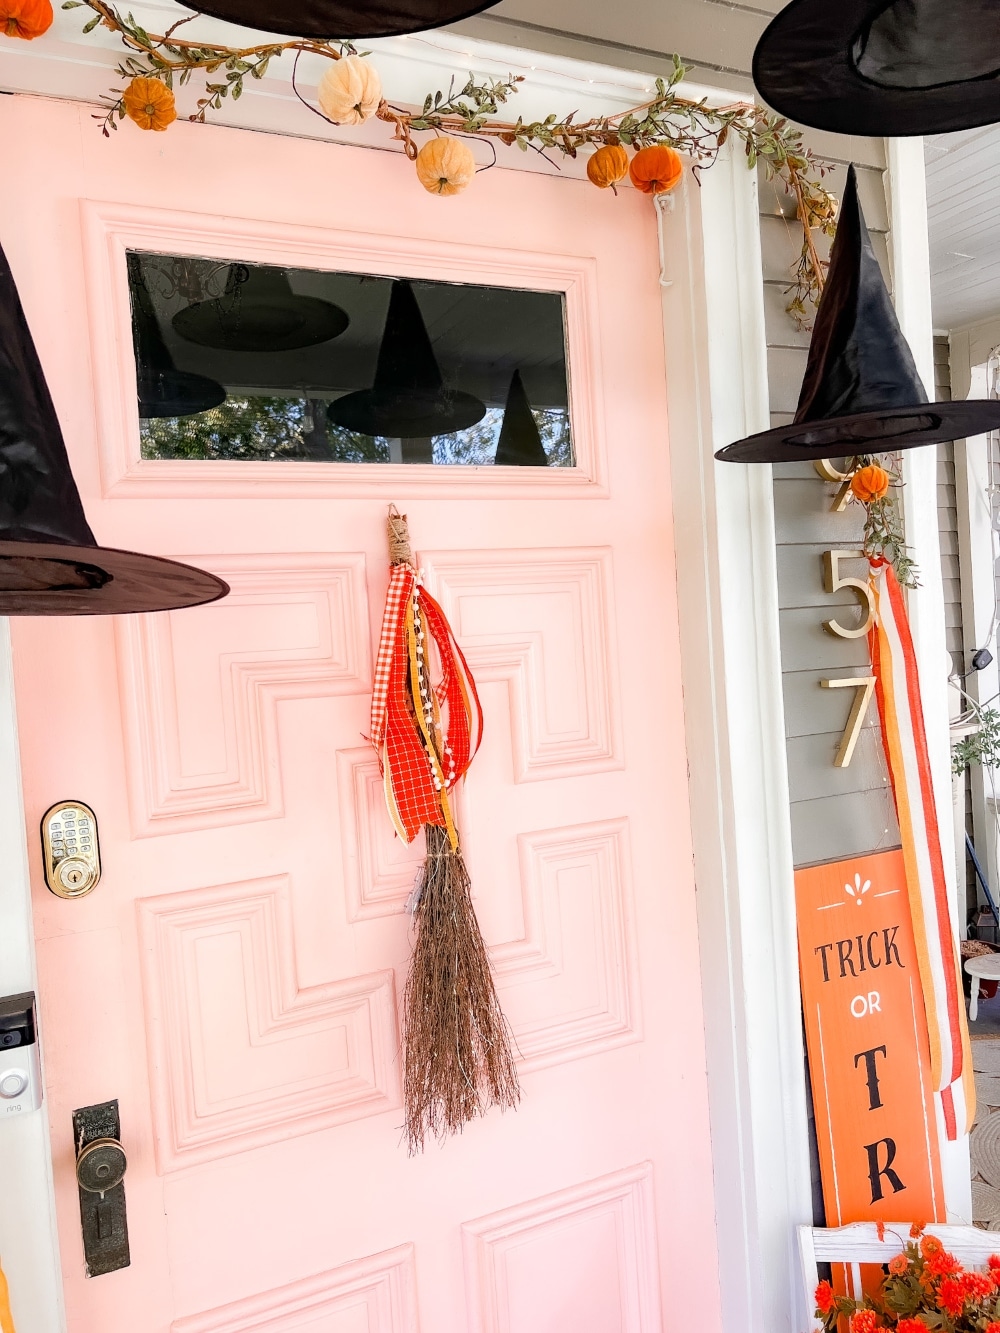 Halloween Witches Broom Wreath. Cast a welcoming spell on visitors this Halloween by creating a delightful witch porch. A glowing witches broom is a whimsical wreath alternative. Battery operated shimmering lights will light the way for guests. This is a hack on the Pottery Barn version for a fraction of the price!